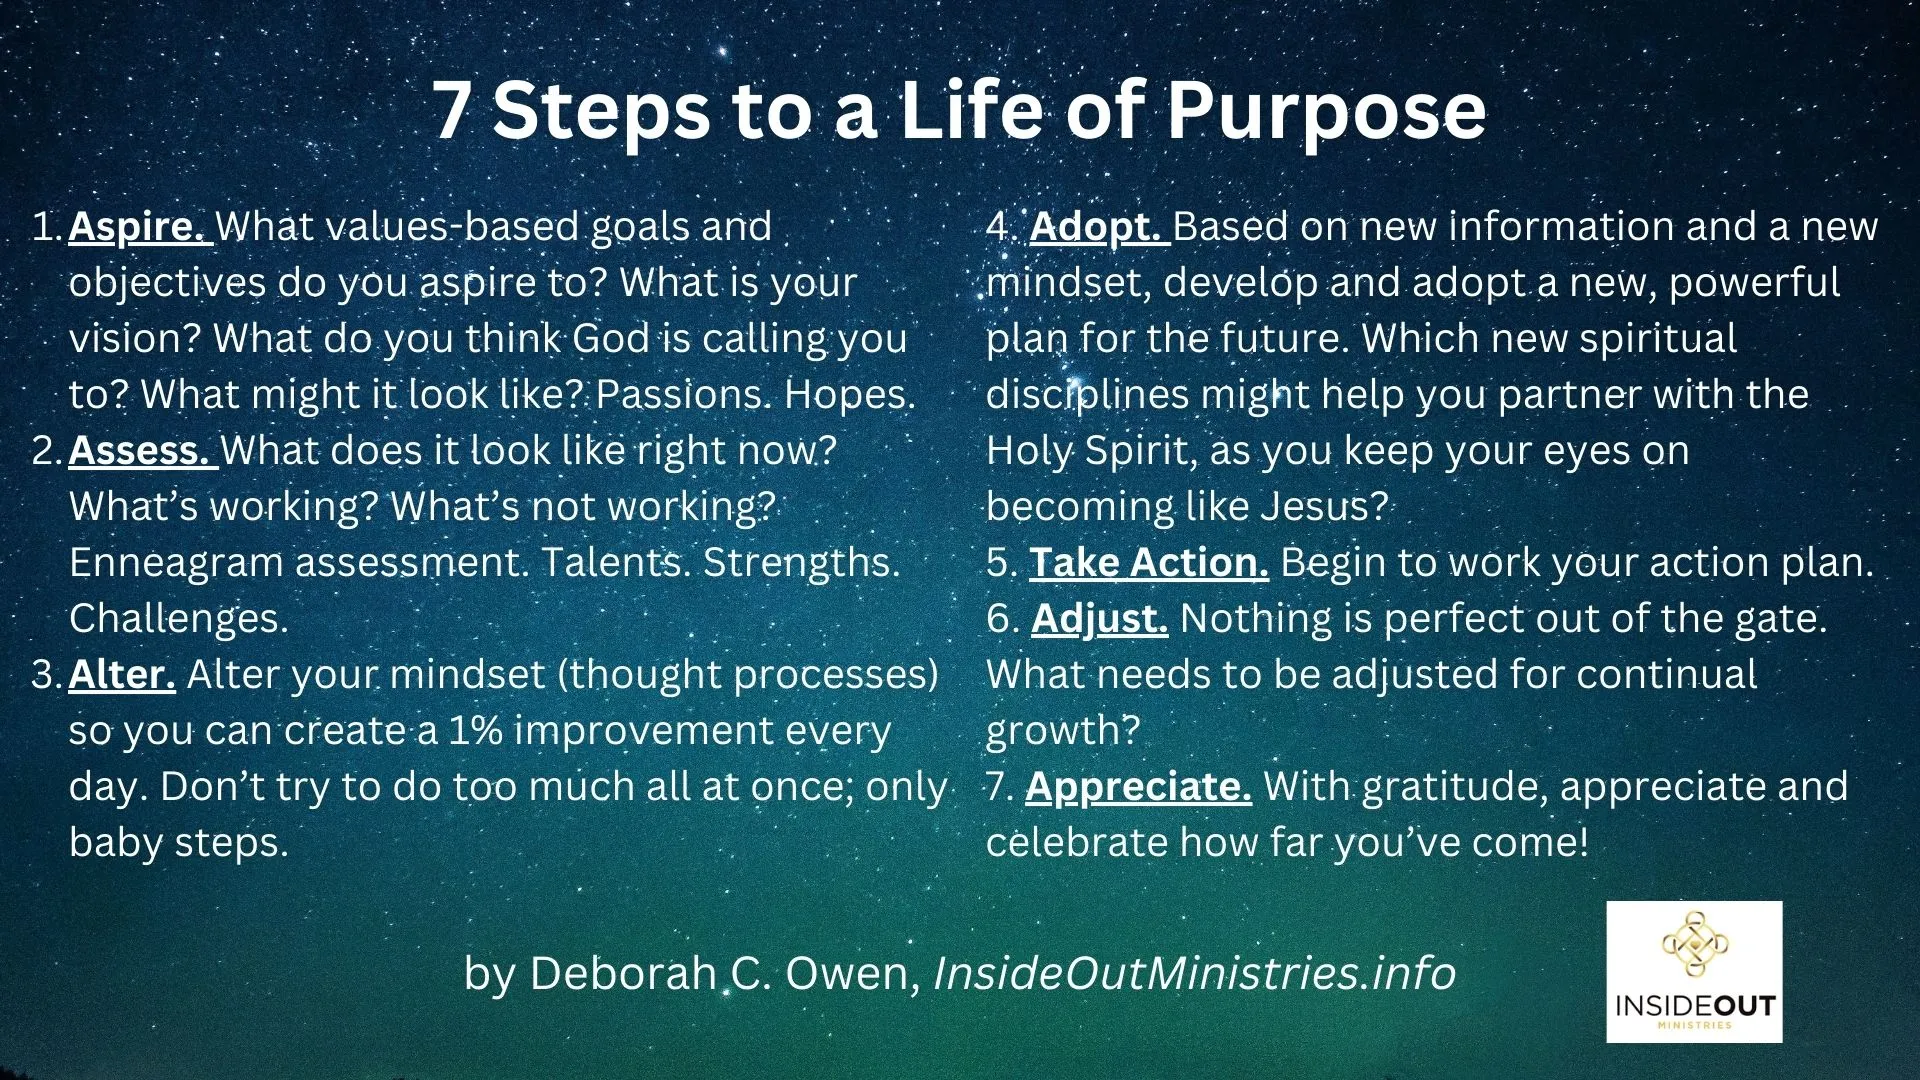 7 Steps to a life of purpose